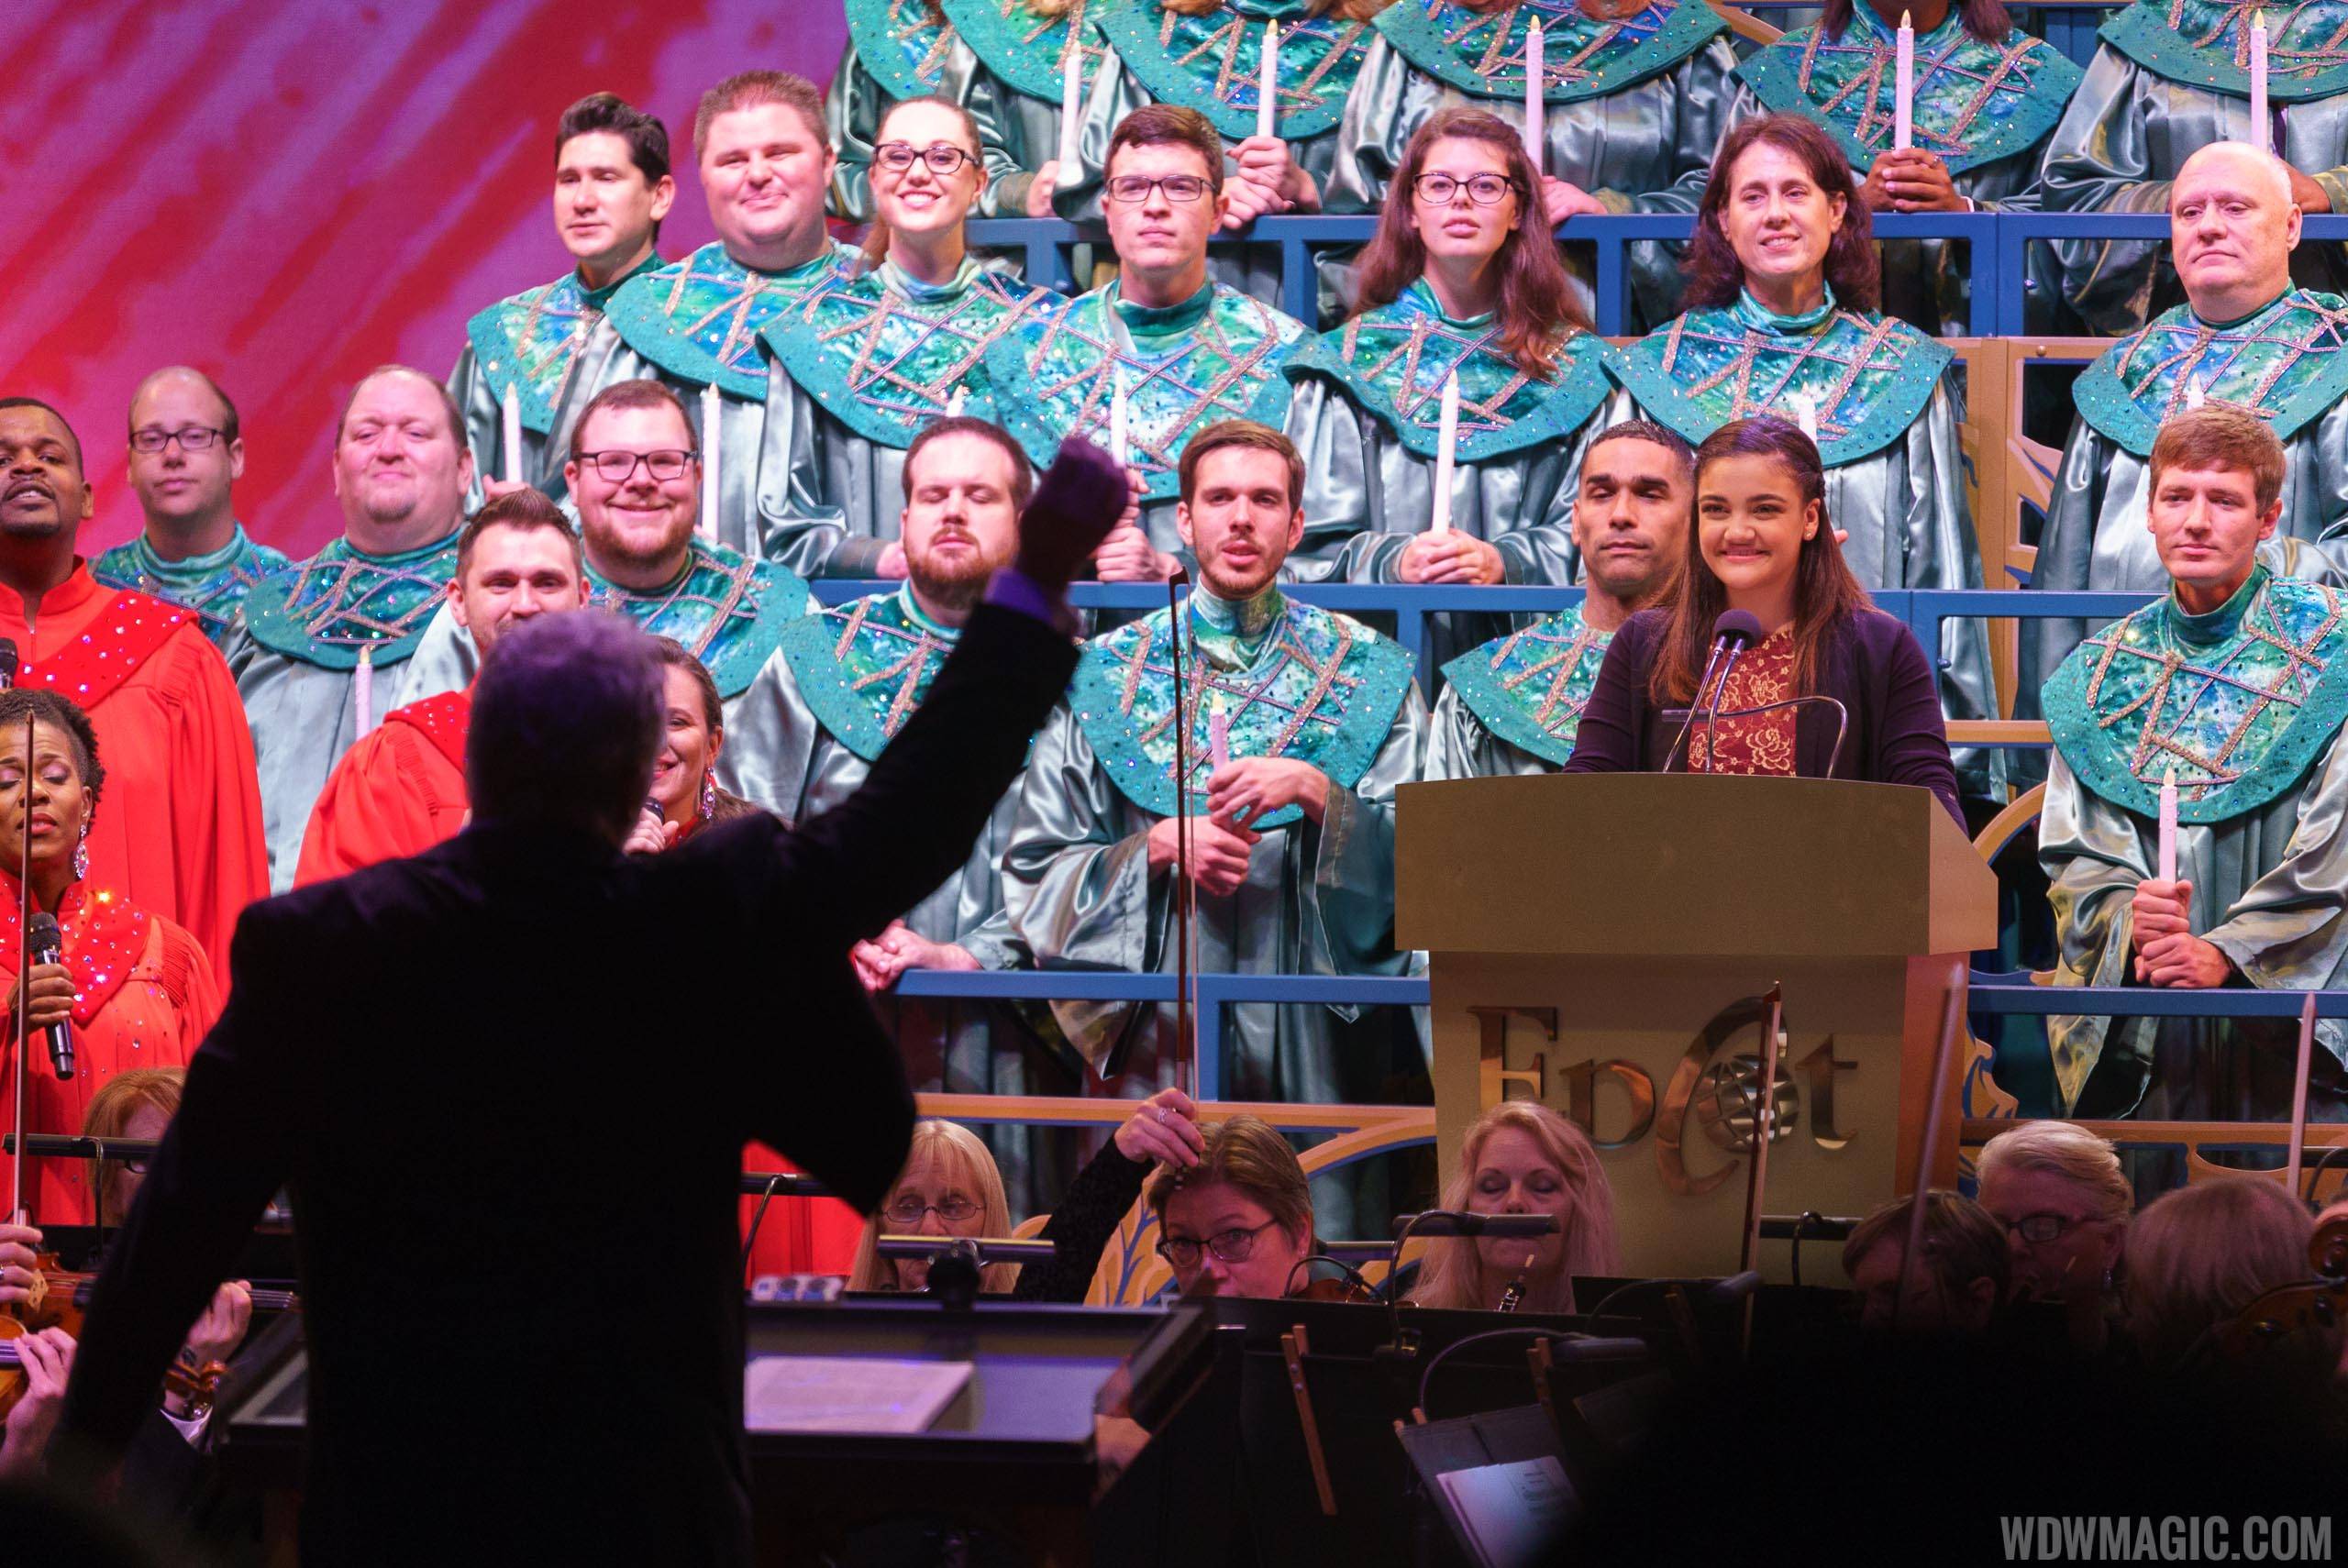 The Candlelight Processional at Epcot